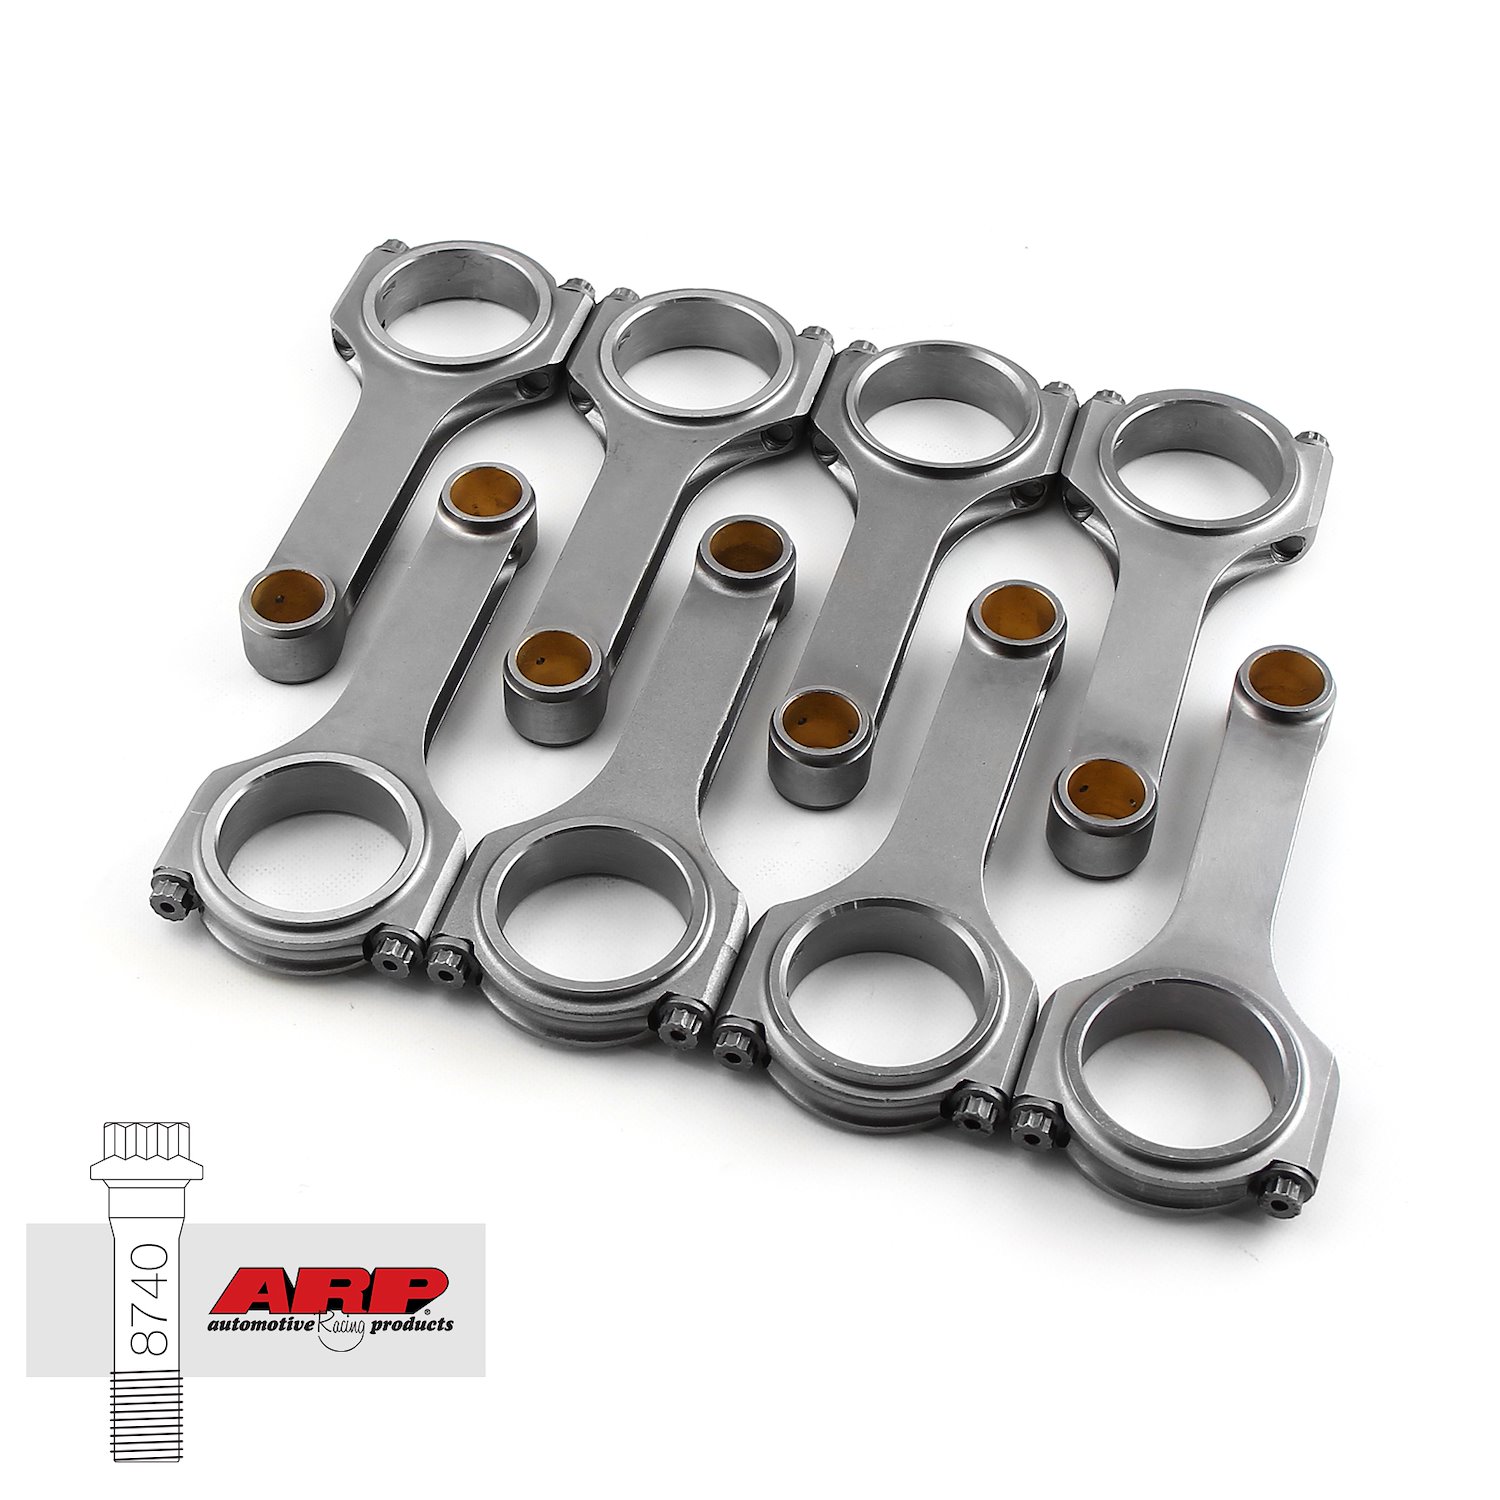 H BEAM 5.400 2.123 .927 4340 CONNECTING RODS